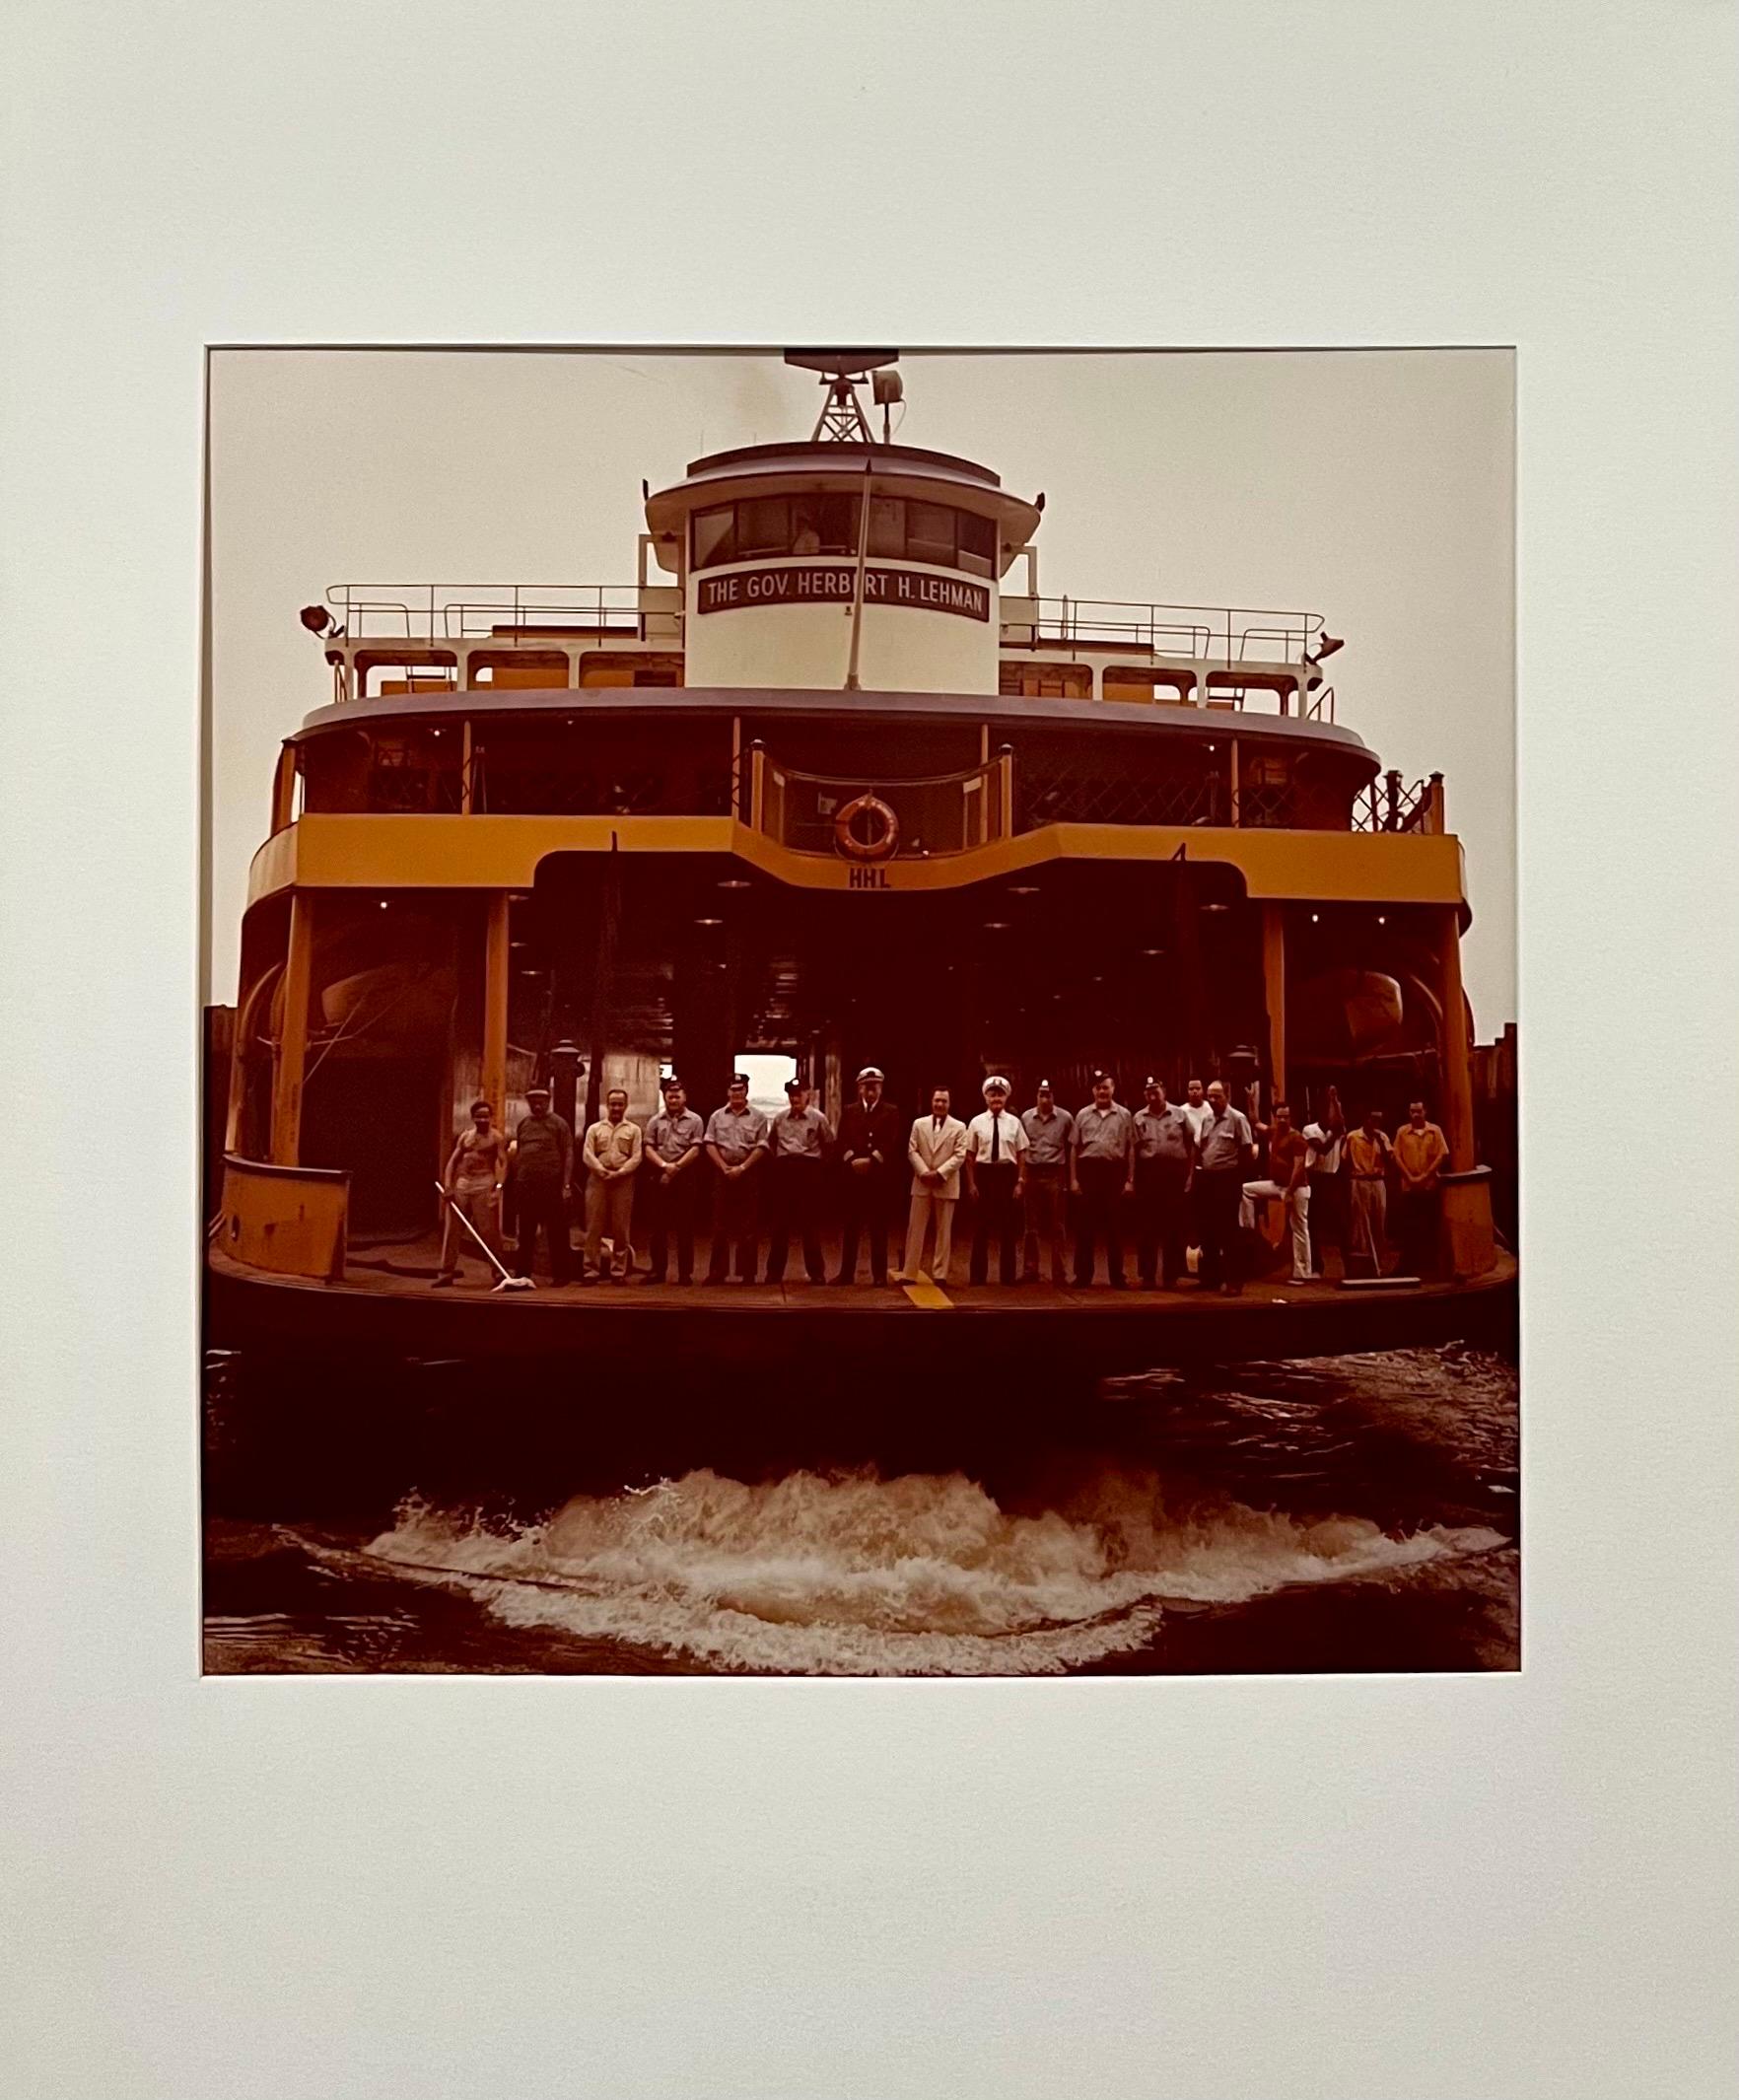 Neal Slavin (American, b. 1941)
Staten Island Ferry Crew
Vintage C-print [Chromogenic development print; Ektacolor prints]
Hand signed and numbered by the photographer 48/75
Photos made with 2.25 X 2.25 Hasselblad camera and 4 X 5 Calumet